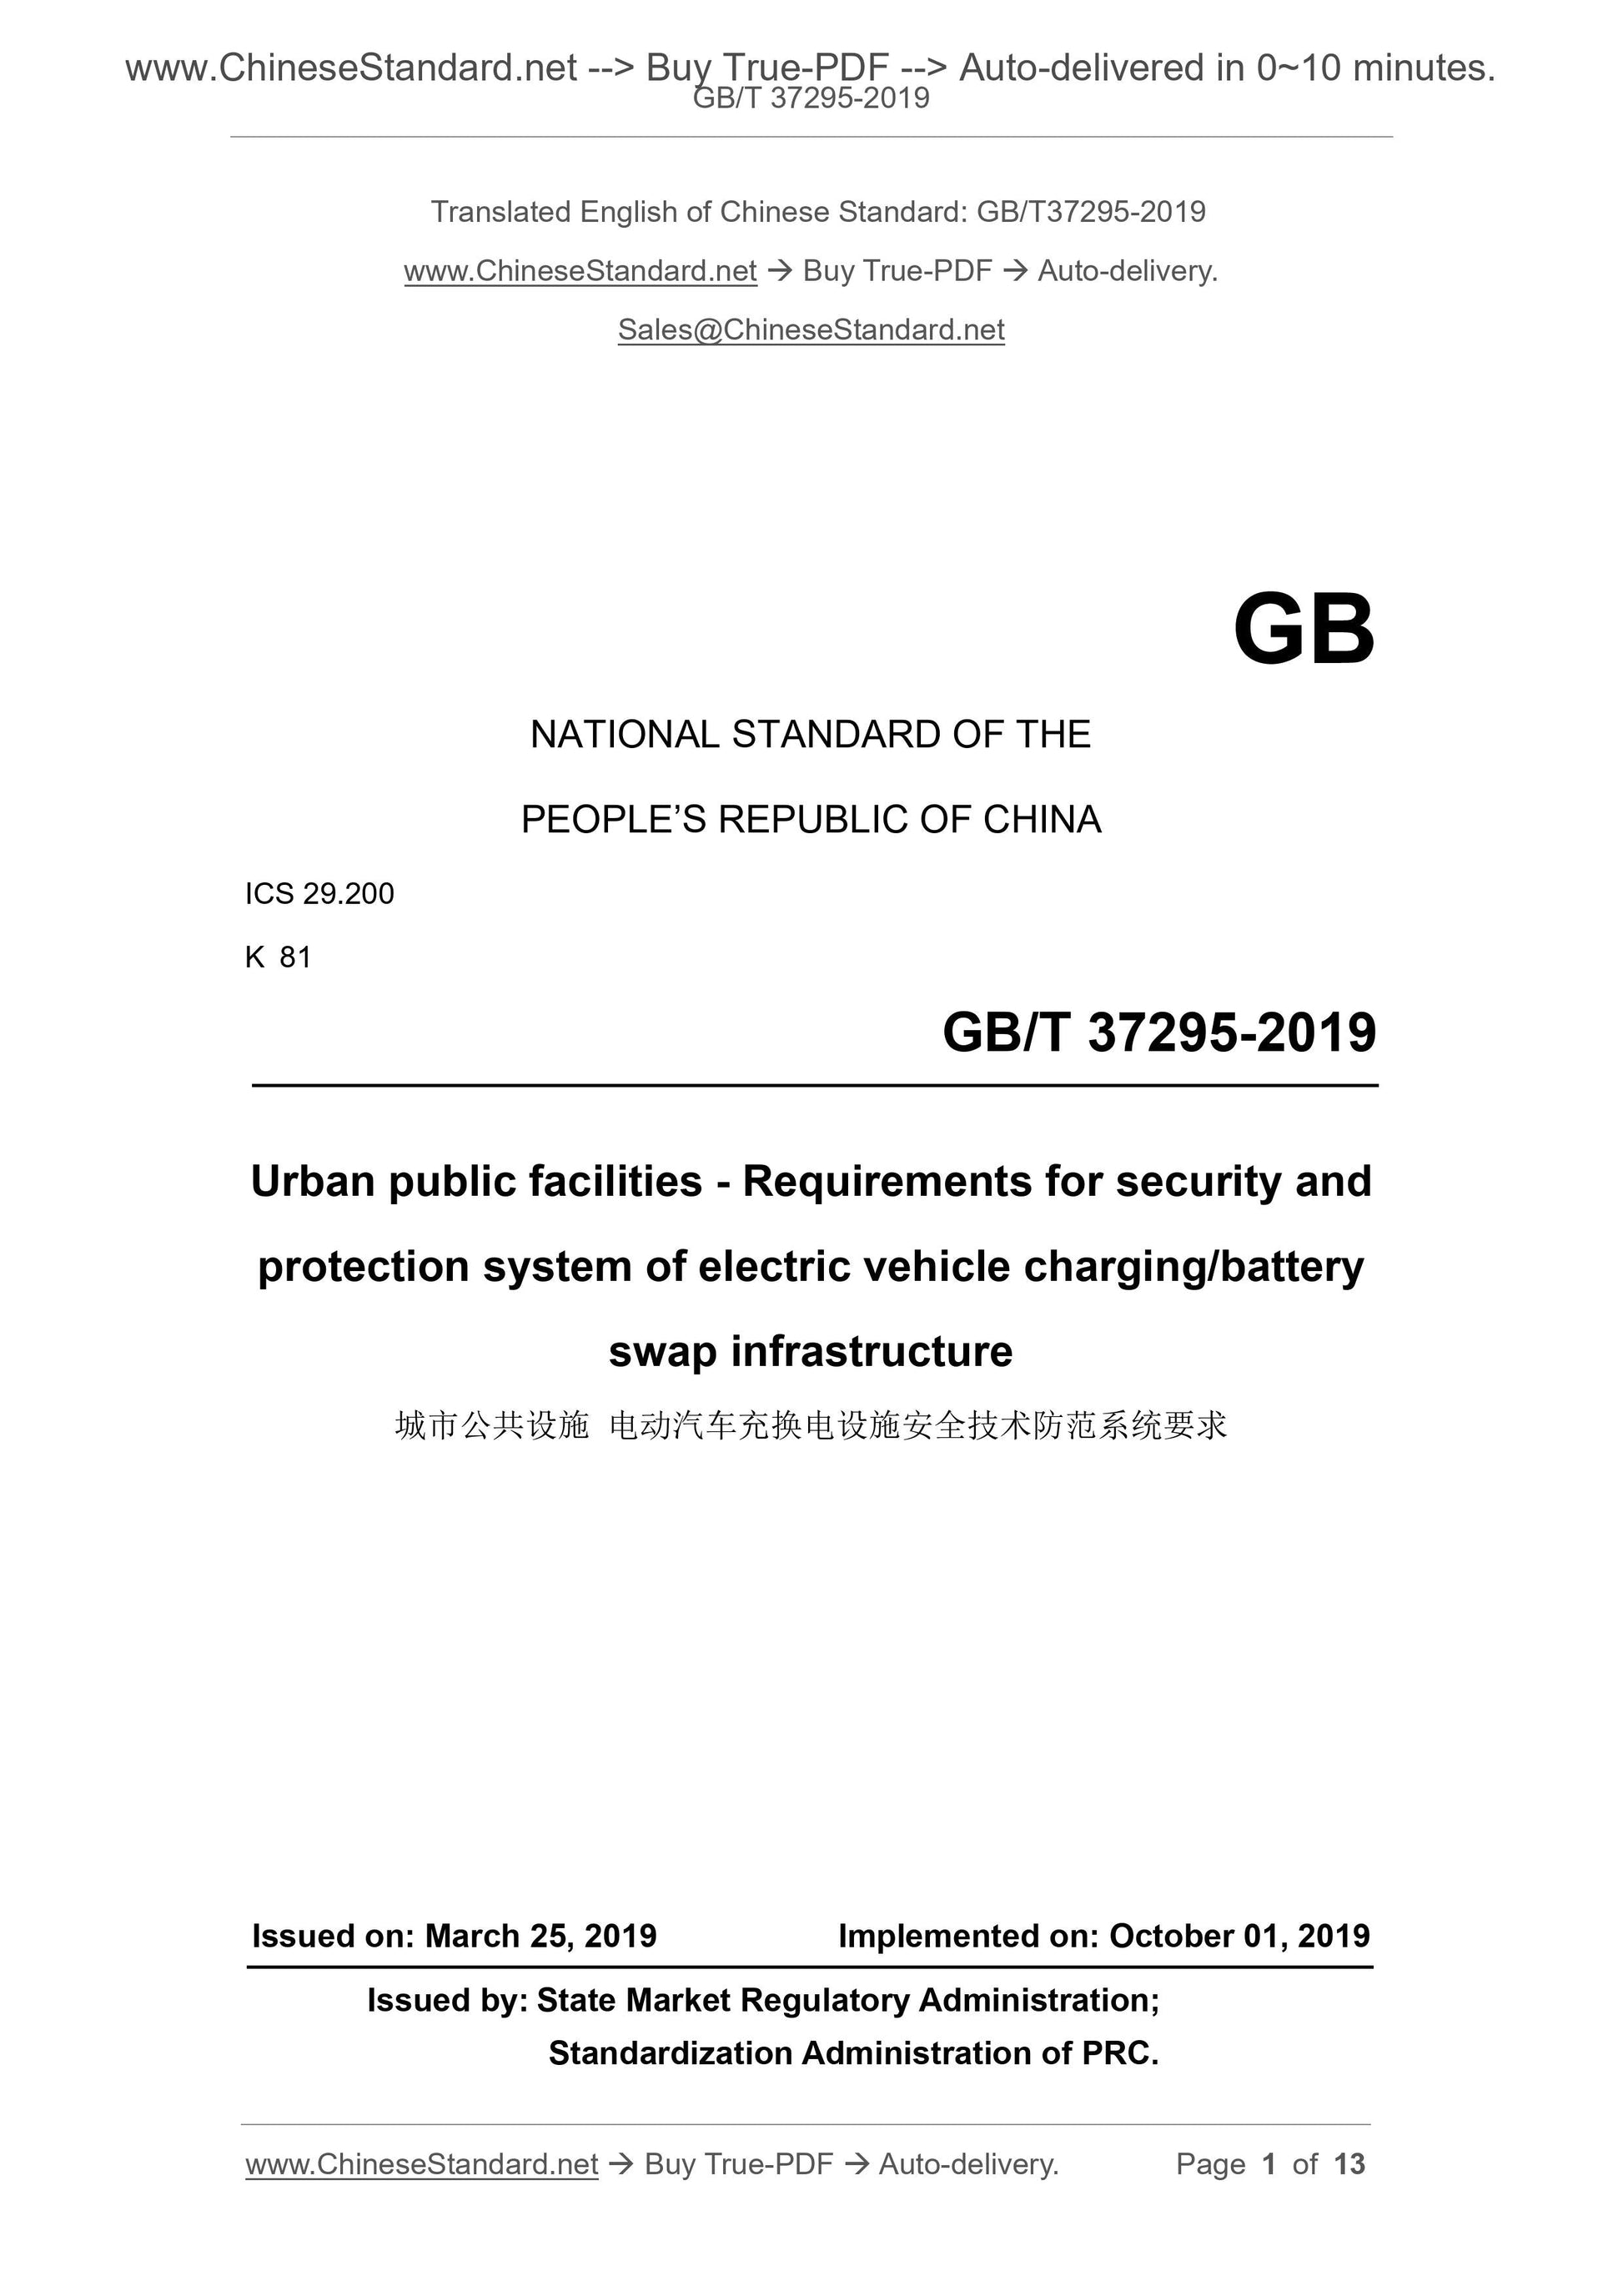 GB/T 37295-2019 Page 1